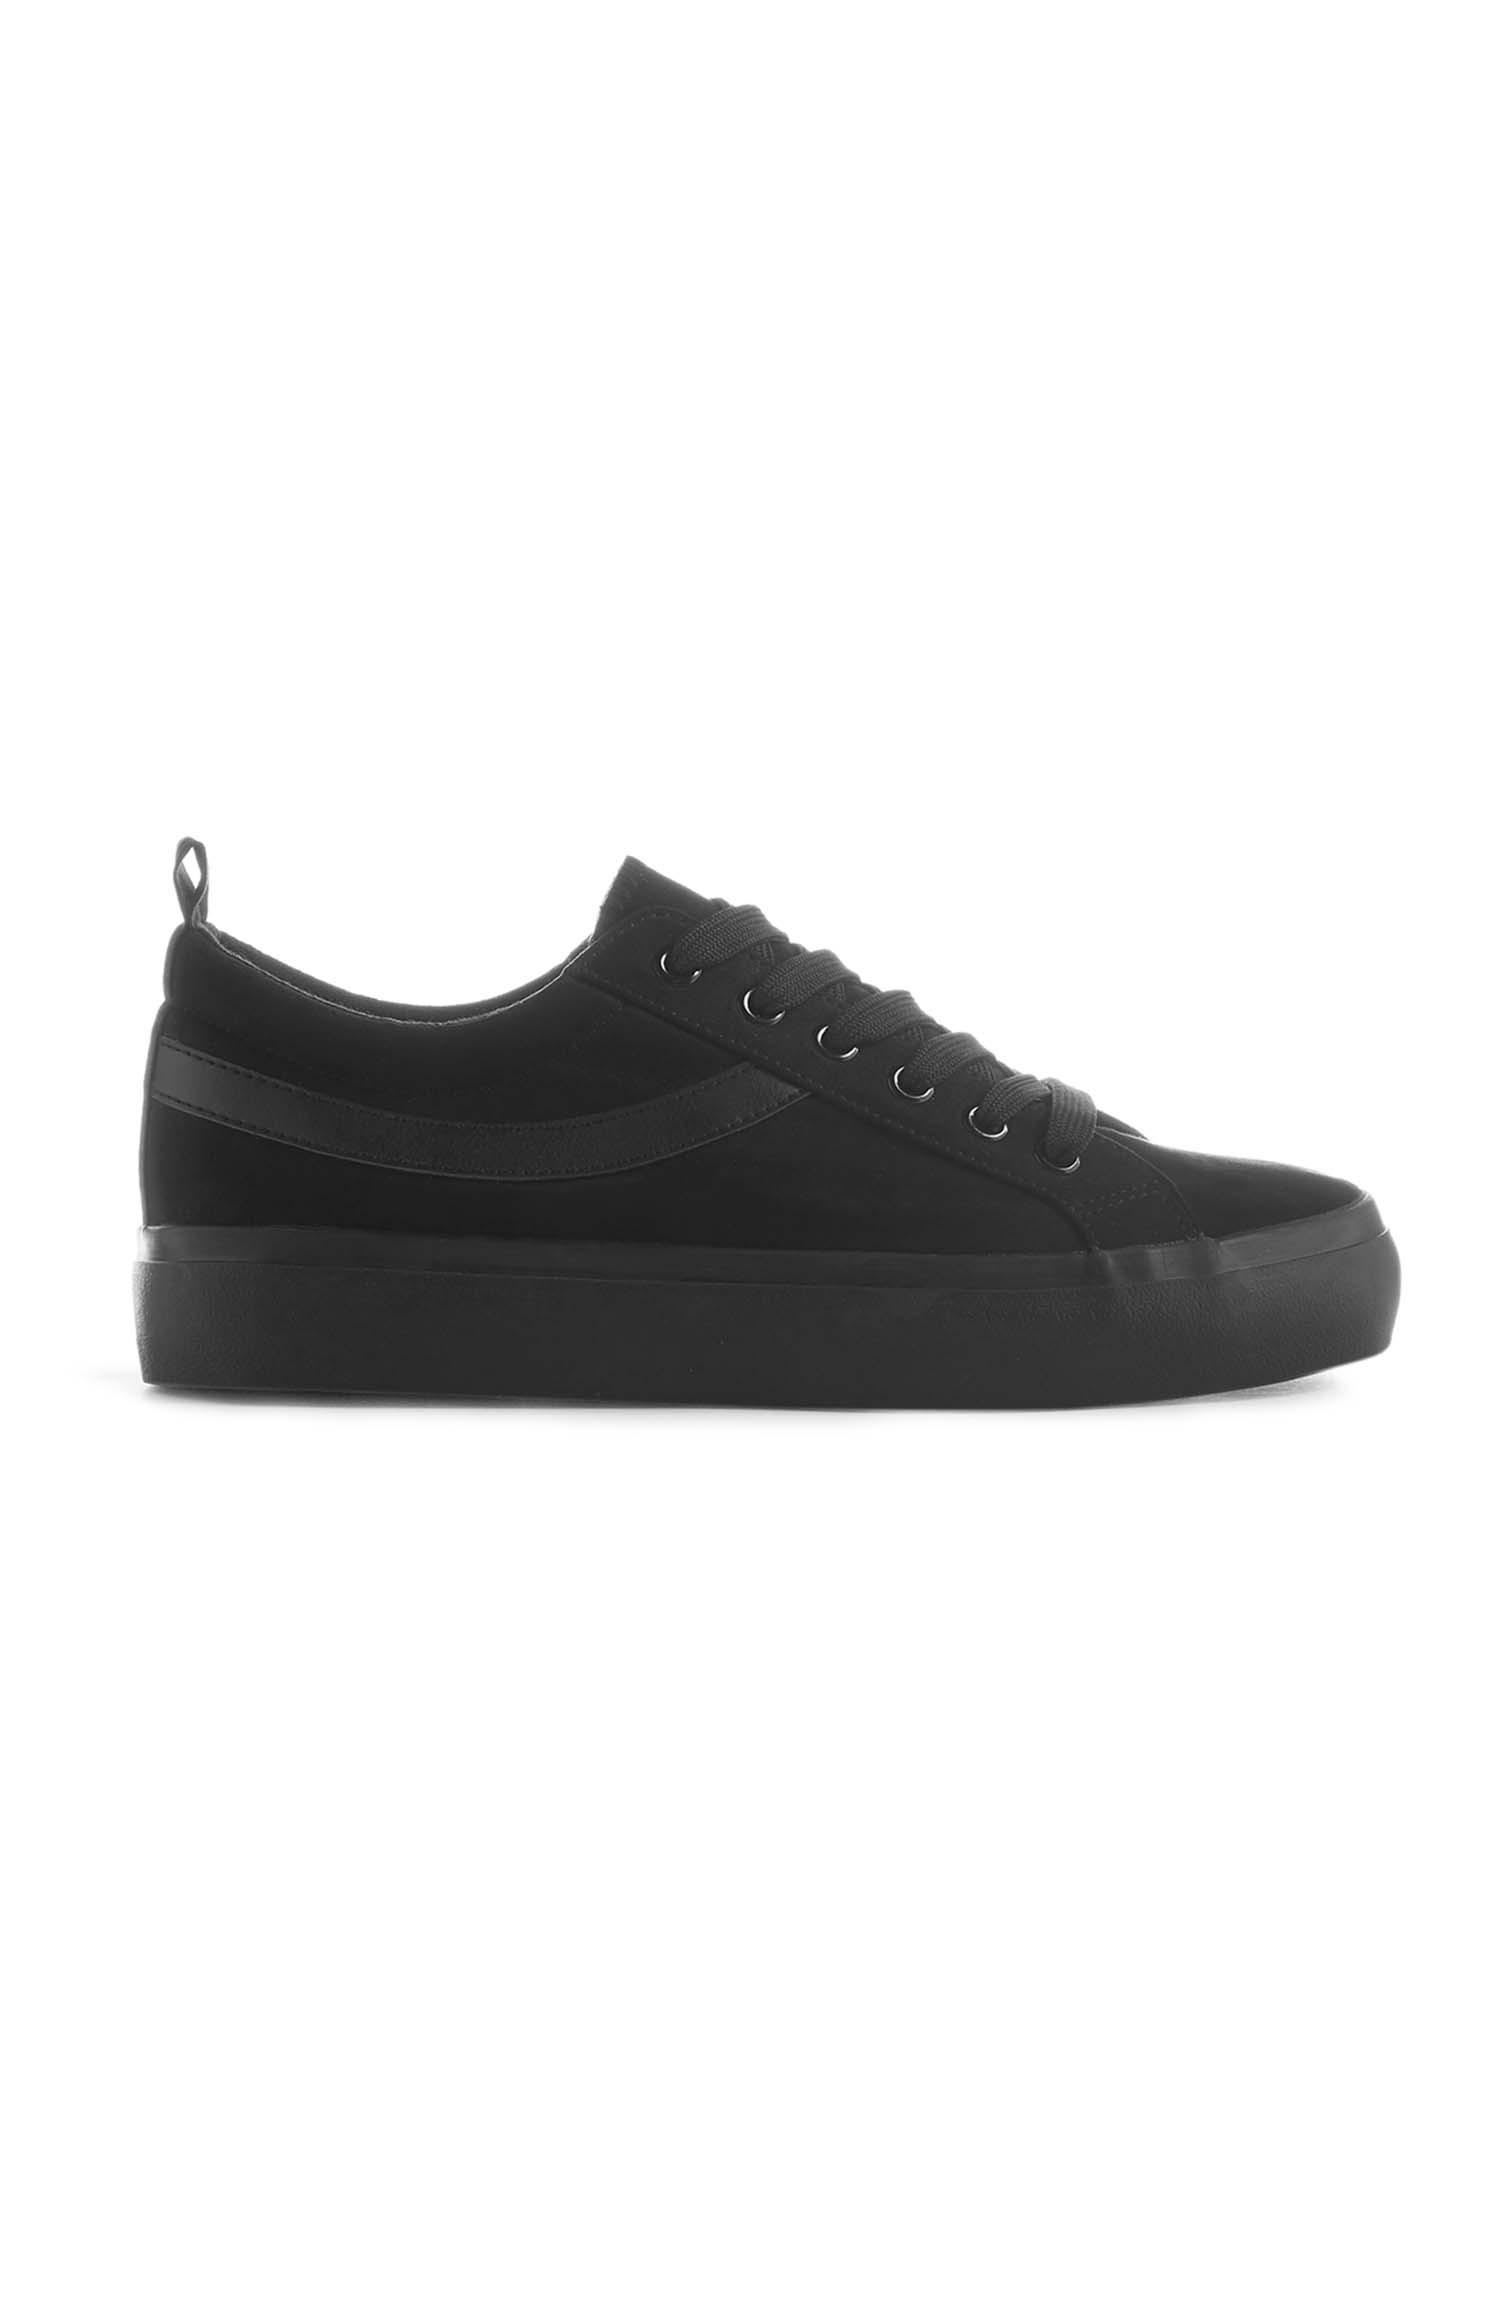 Black Skate Pump | Trainers | Shoes & Boots | Womens | Categories ...